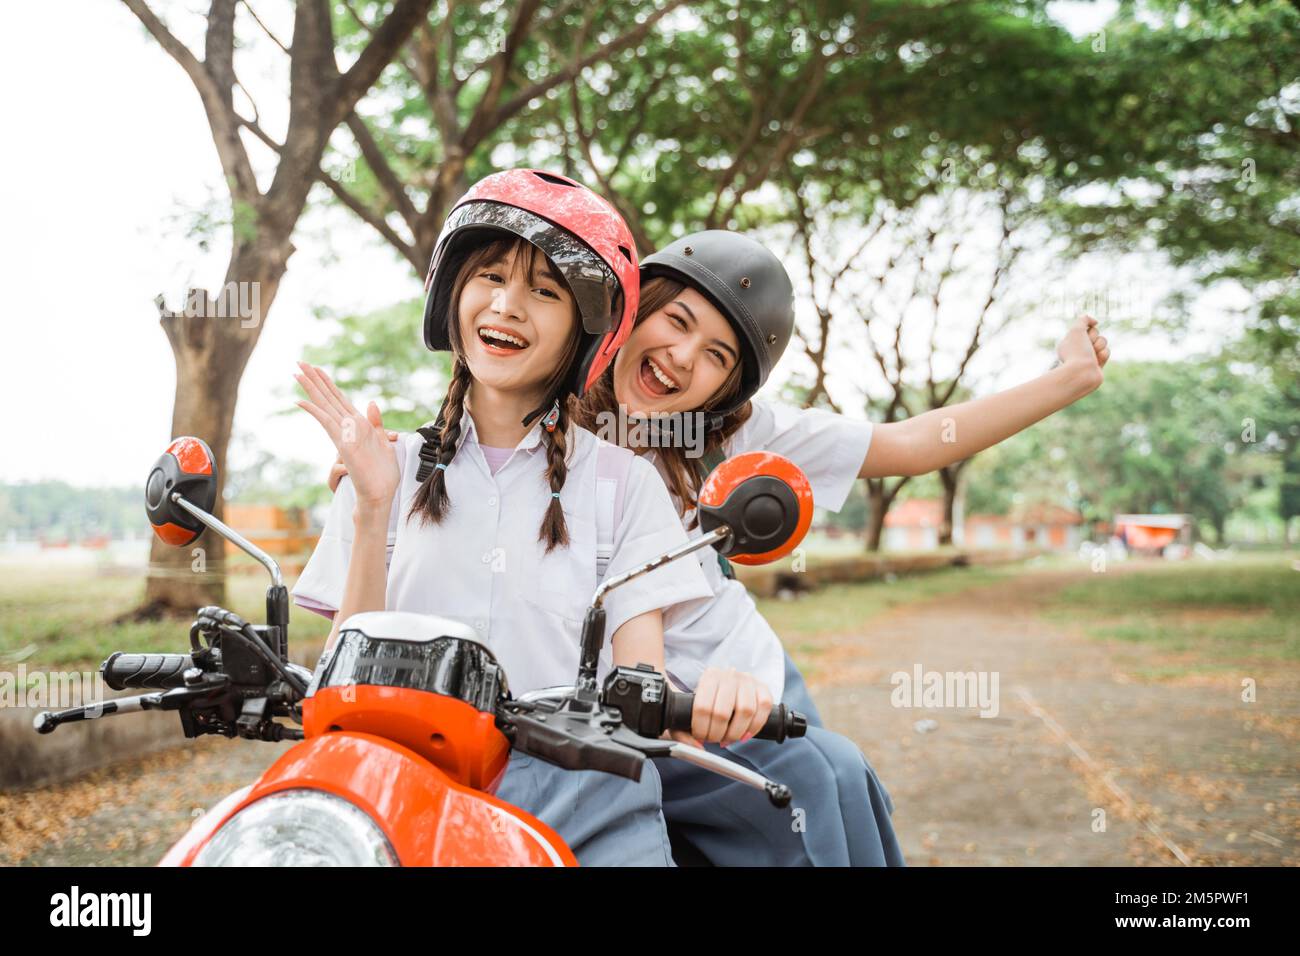 Two student girls wearing helmets waving while riding motorbikes Stock Photo